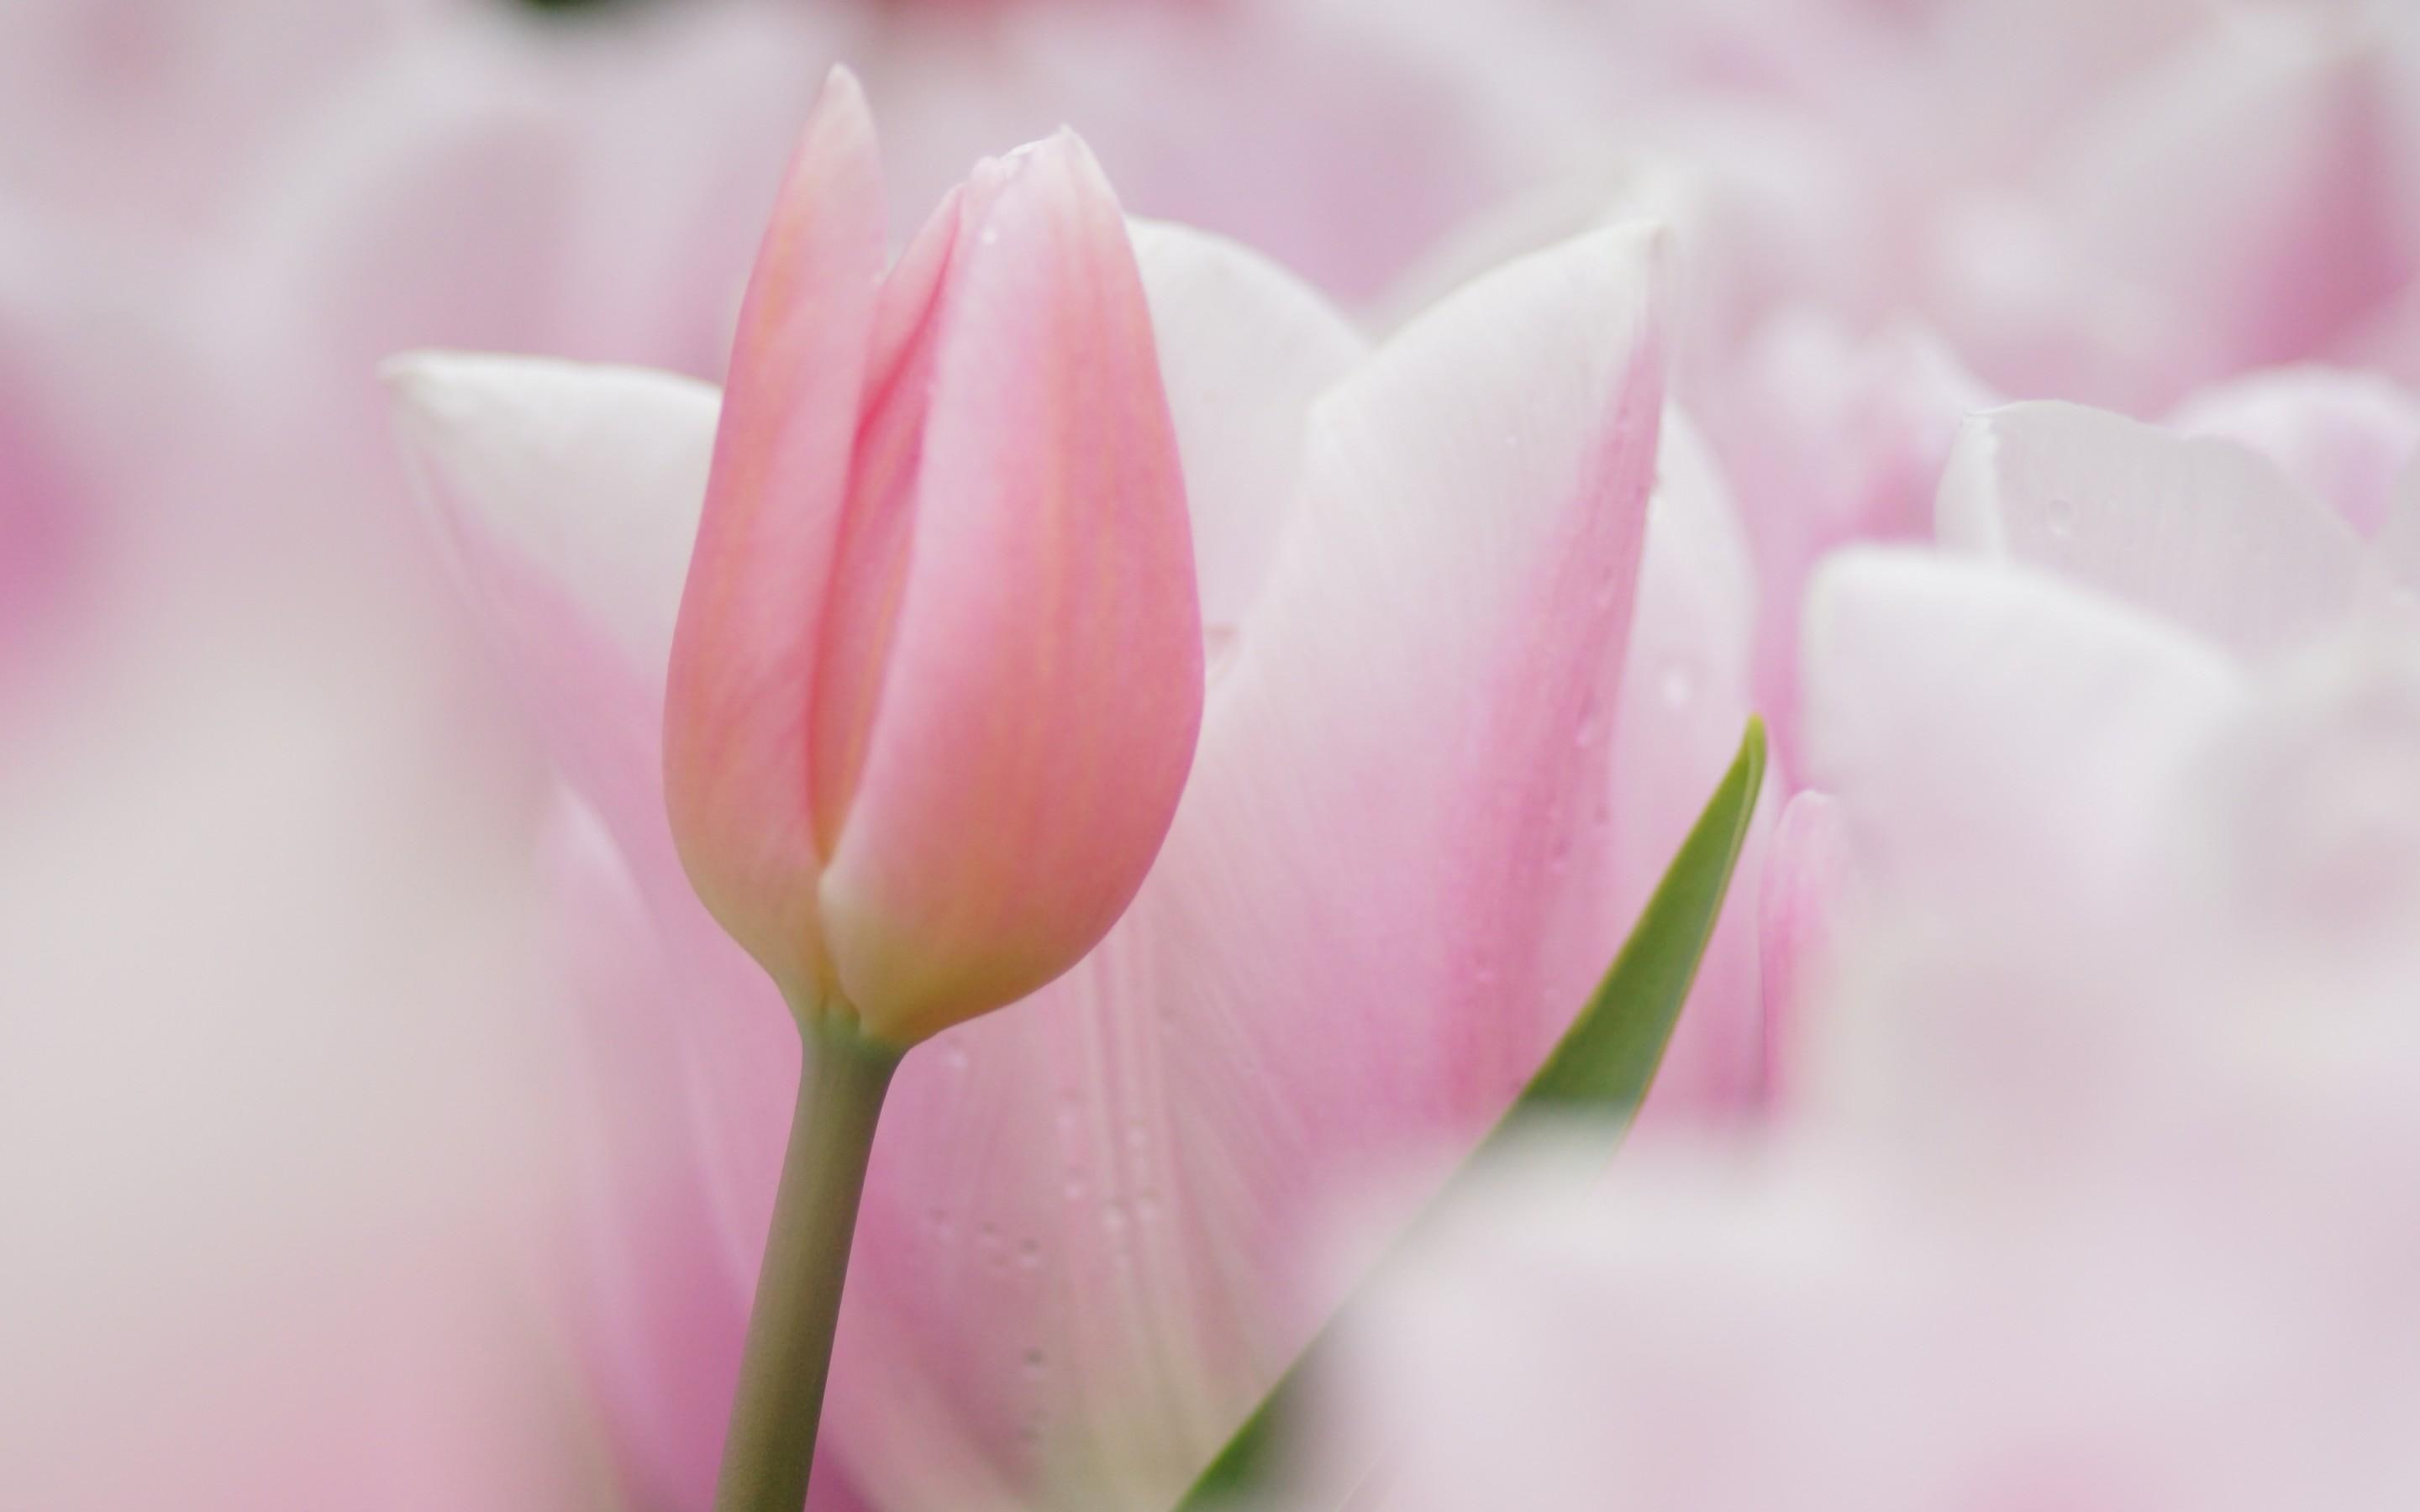 *So soft and pale*, nature, pastel, tulips, flowers, pink